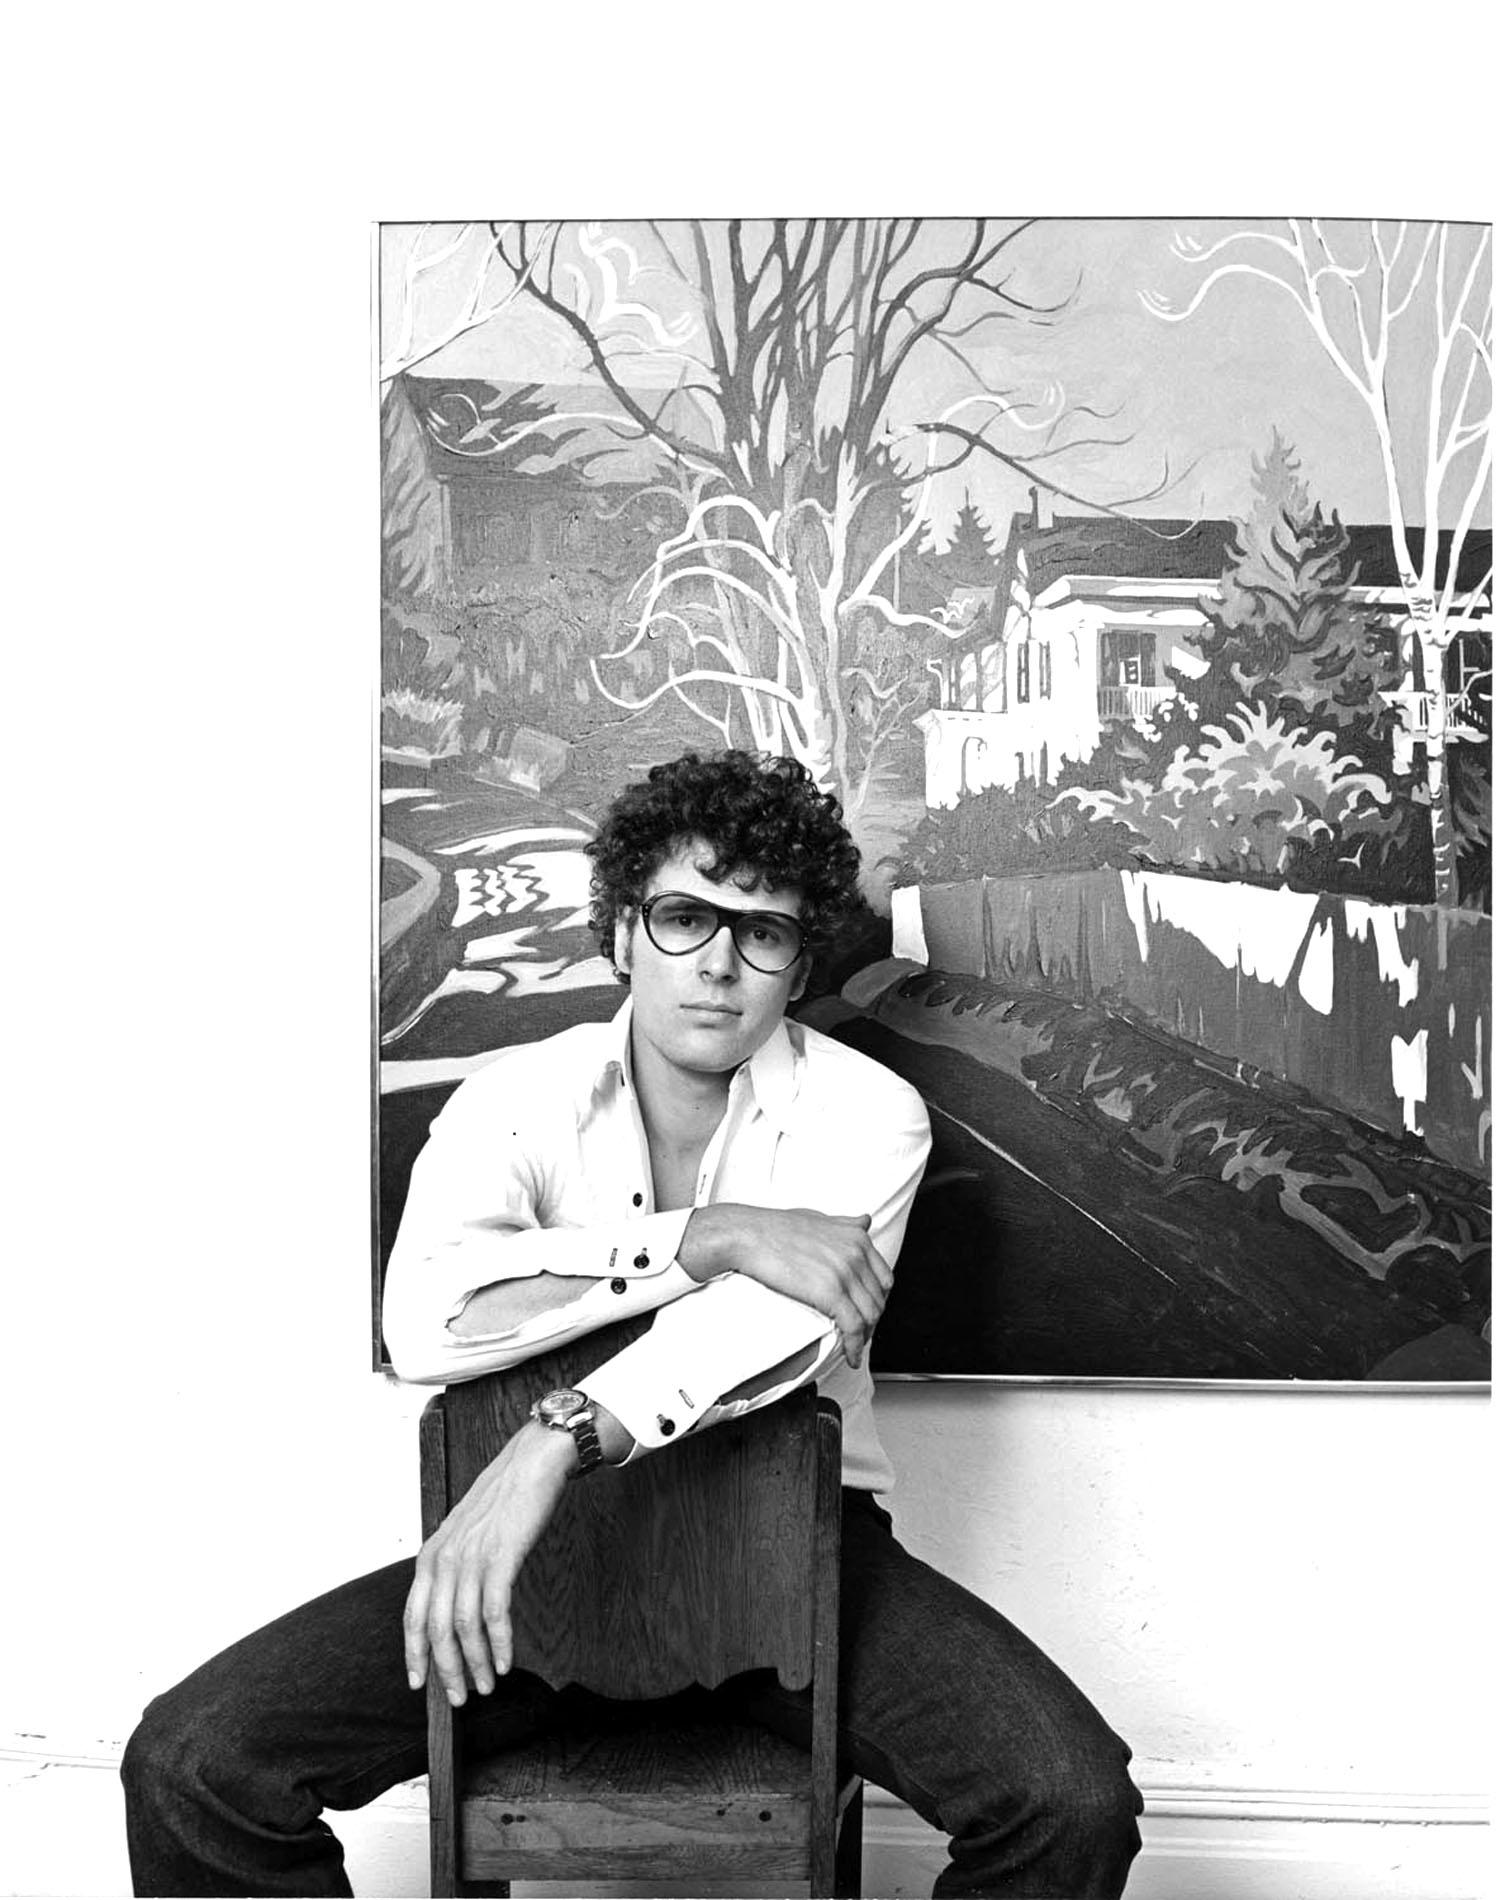 11 x 14" vintage silver gelatin photograph of painter Jon Carsman in his Manhattan studio, 1974 Signed on the verso by Jack Mitchell. Comes directly from the Jack Mitchell Archives with a certificate of authenticity.  

Jack Mitchell, (1925-2013)